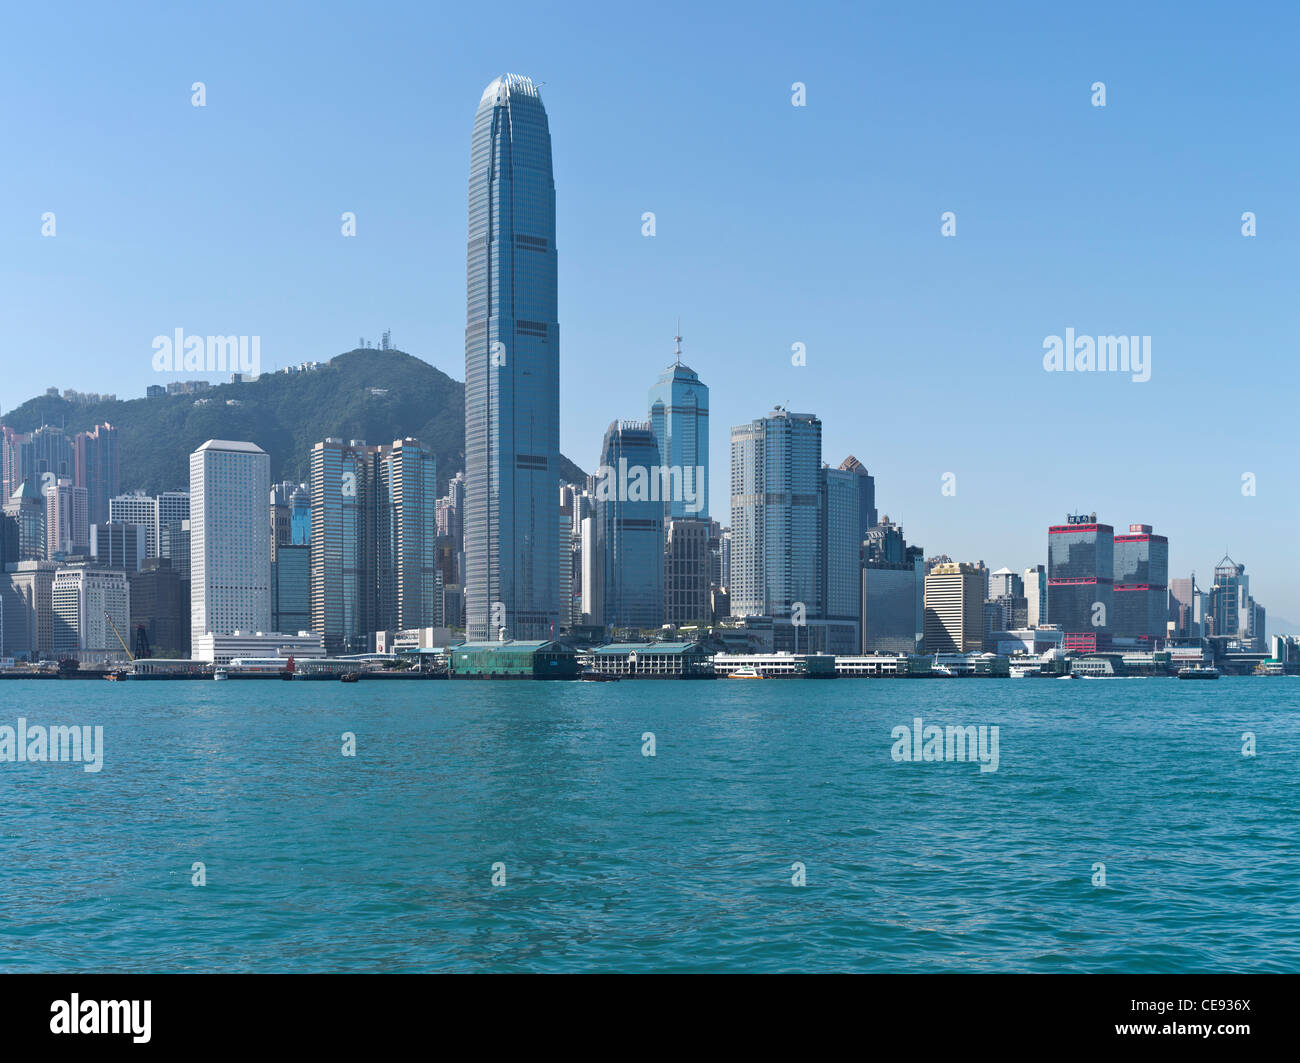 dh Central IFC 2 building HONG KONG HARBOR HONG KONG Central harbour Victoria peak skyline skyscrapers city daytime cityscape from harbour Stock Photo